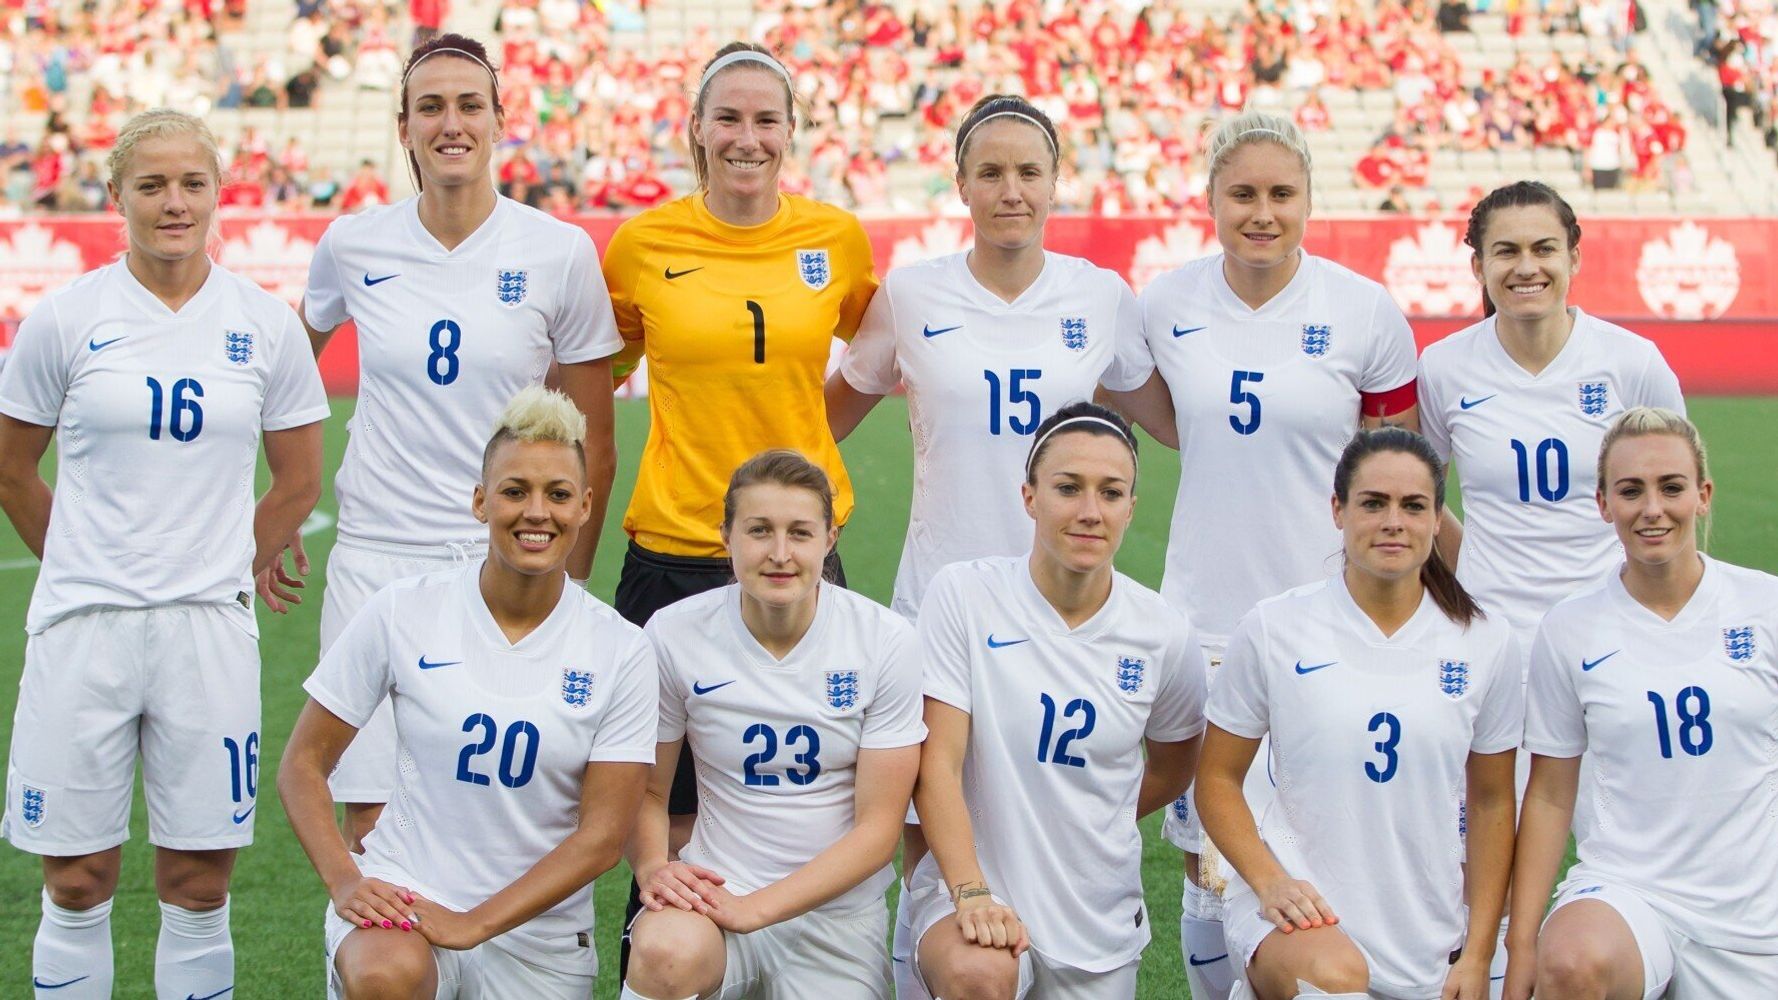 Women's World Cup 2015 Get To Know The Players On The England Team